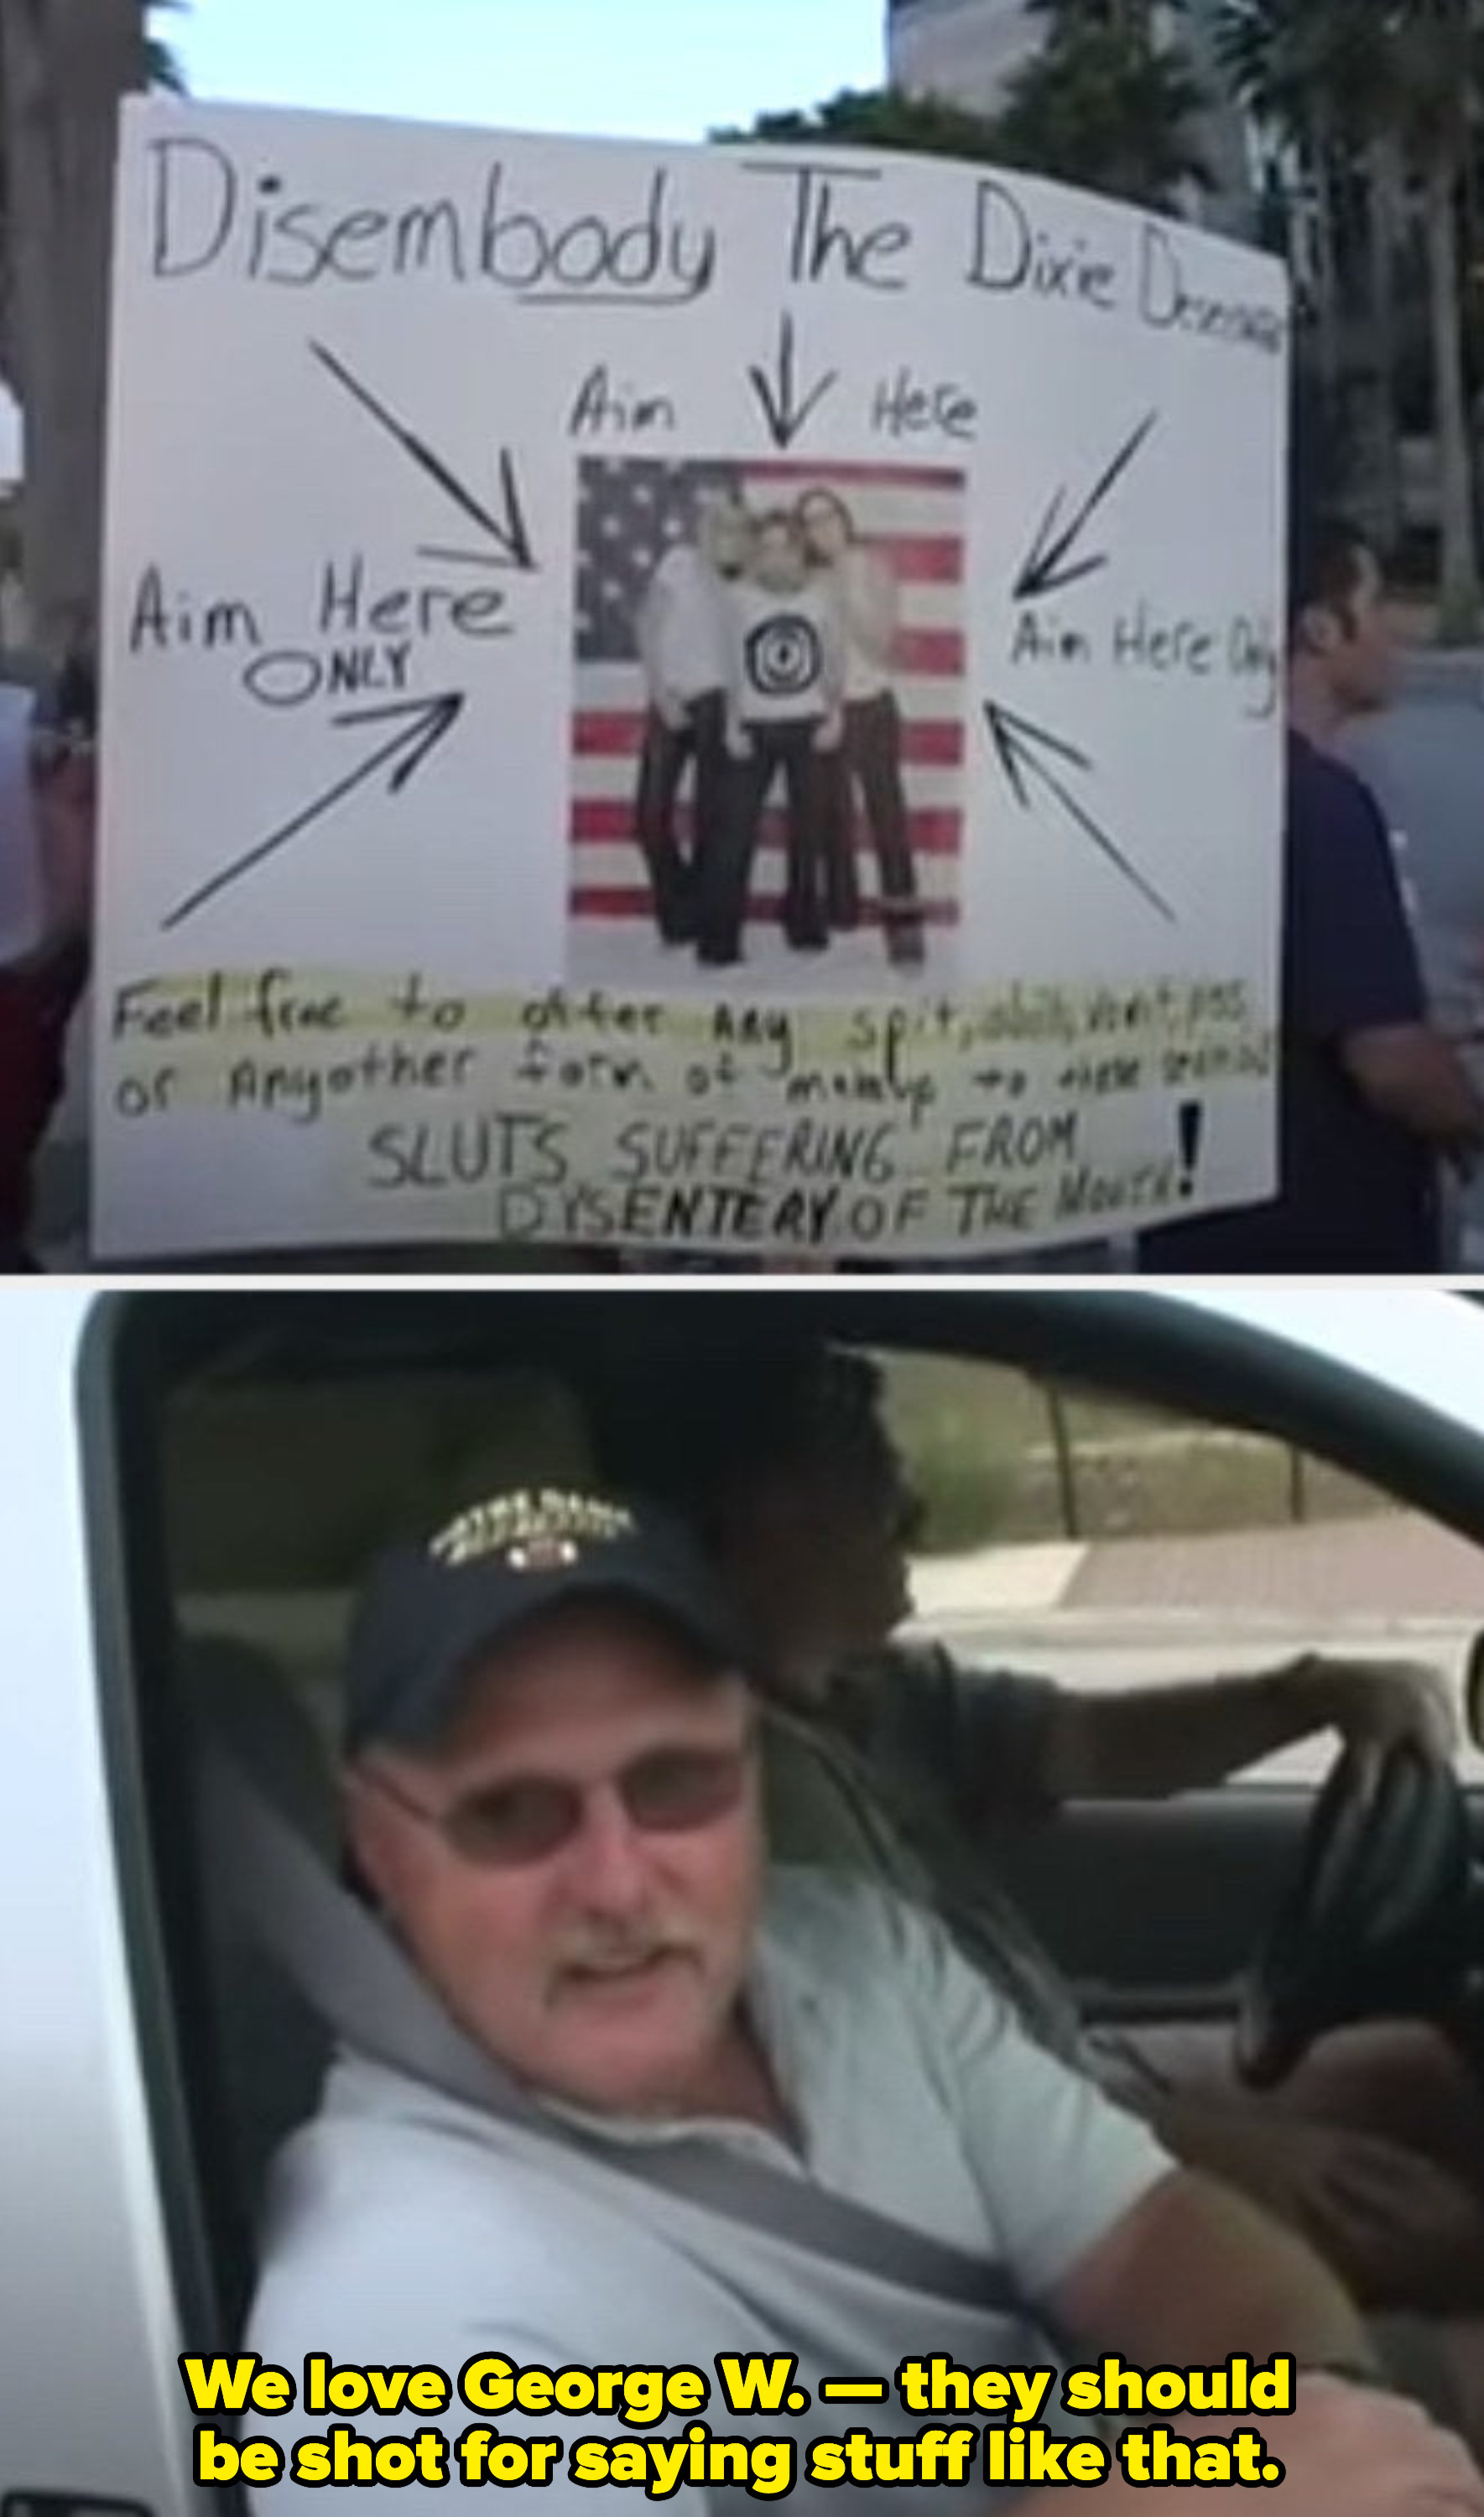 Someone protesting The Chicks with a poster that reads: &quot;Sluts suffering from dysentery of the mouth!&quot; A US citizen from the South saying &quot;We love George W. -- they should be shot for saying stuff like that&quot; 